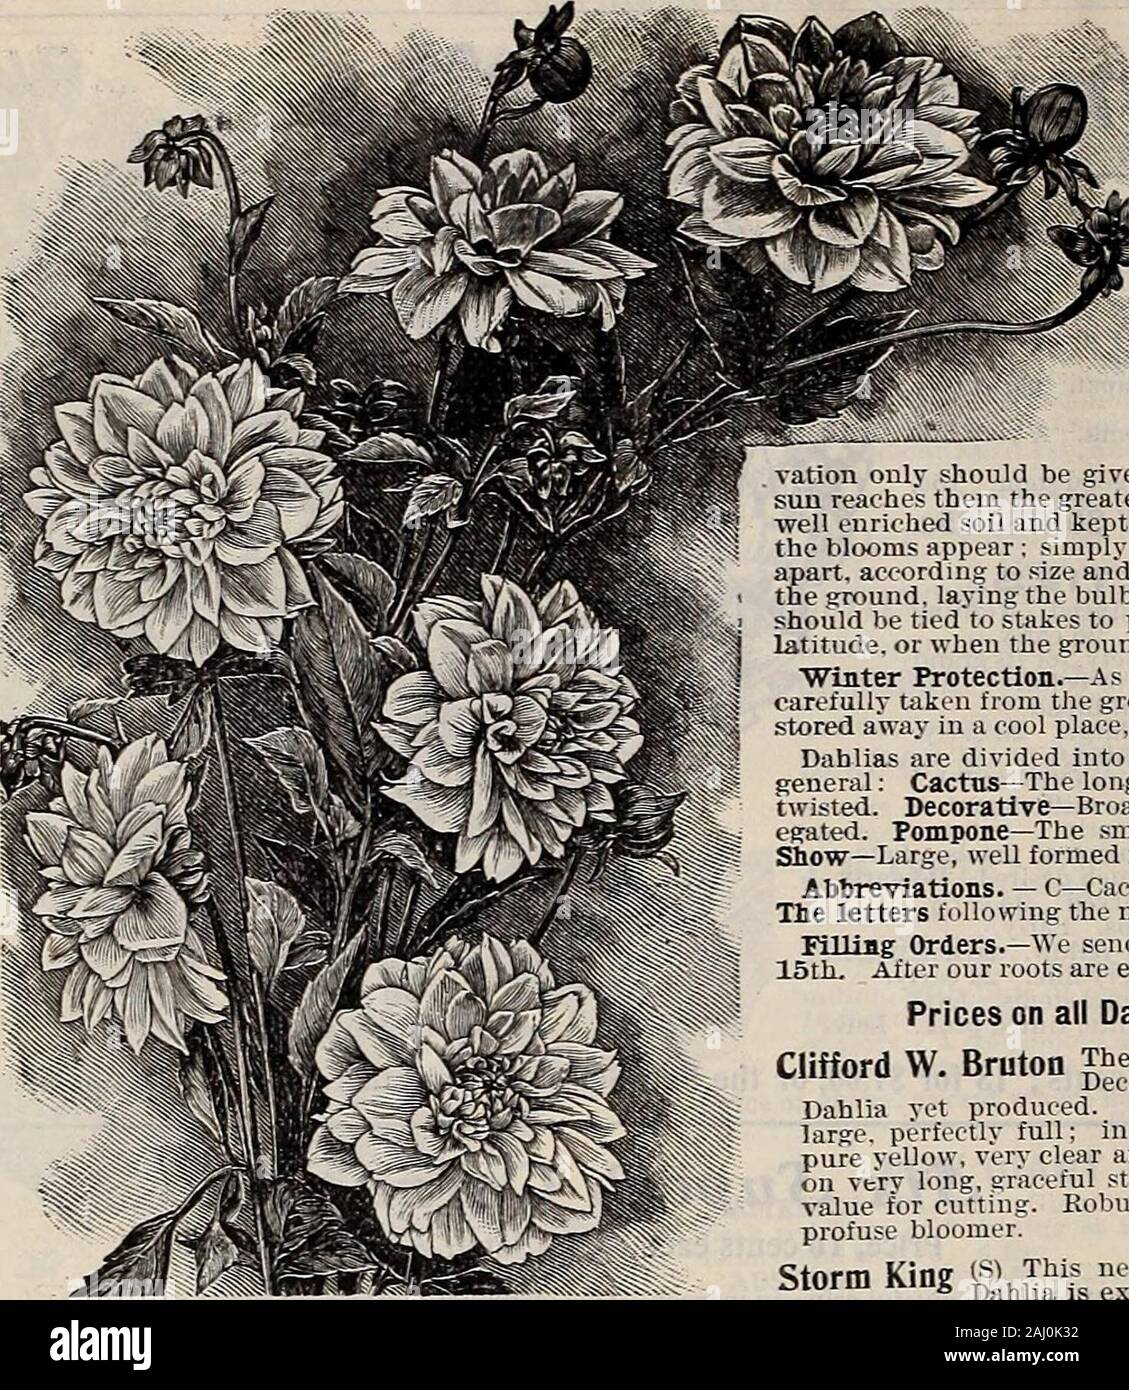 Livingston's seeds : 1902 'true blue' annual . orolla very large, double, and pure white. Beg Otl-t^C^ for Bedding andmas House Cultare. Six Finest Price, 10 cents each. The Set of 6 for 50 cents. ARGEHTEA GUTTATA—A handsome foliage variety. Purple bronze leaves, oblong in shape, with silvery markings. White flowers.VULCAN—A grand new Begonia Has an intense scarlet bloom. SANDERSONI—-A. bushy growing variety with glossy deep green loaves. Flowers in clusters of drooping, scarlet, heart-shaped buds.METALLICA—f^rand for tall specimen plants. Thick panicles of pink buds and white flowers against Stock Photo